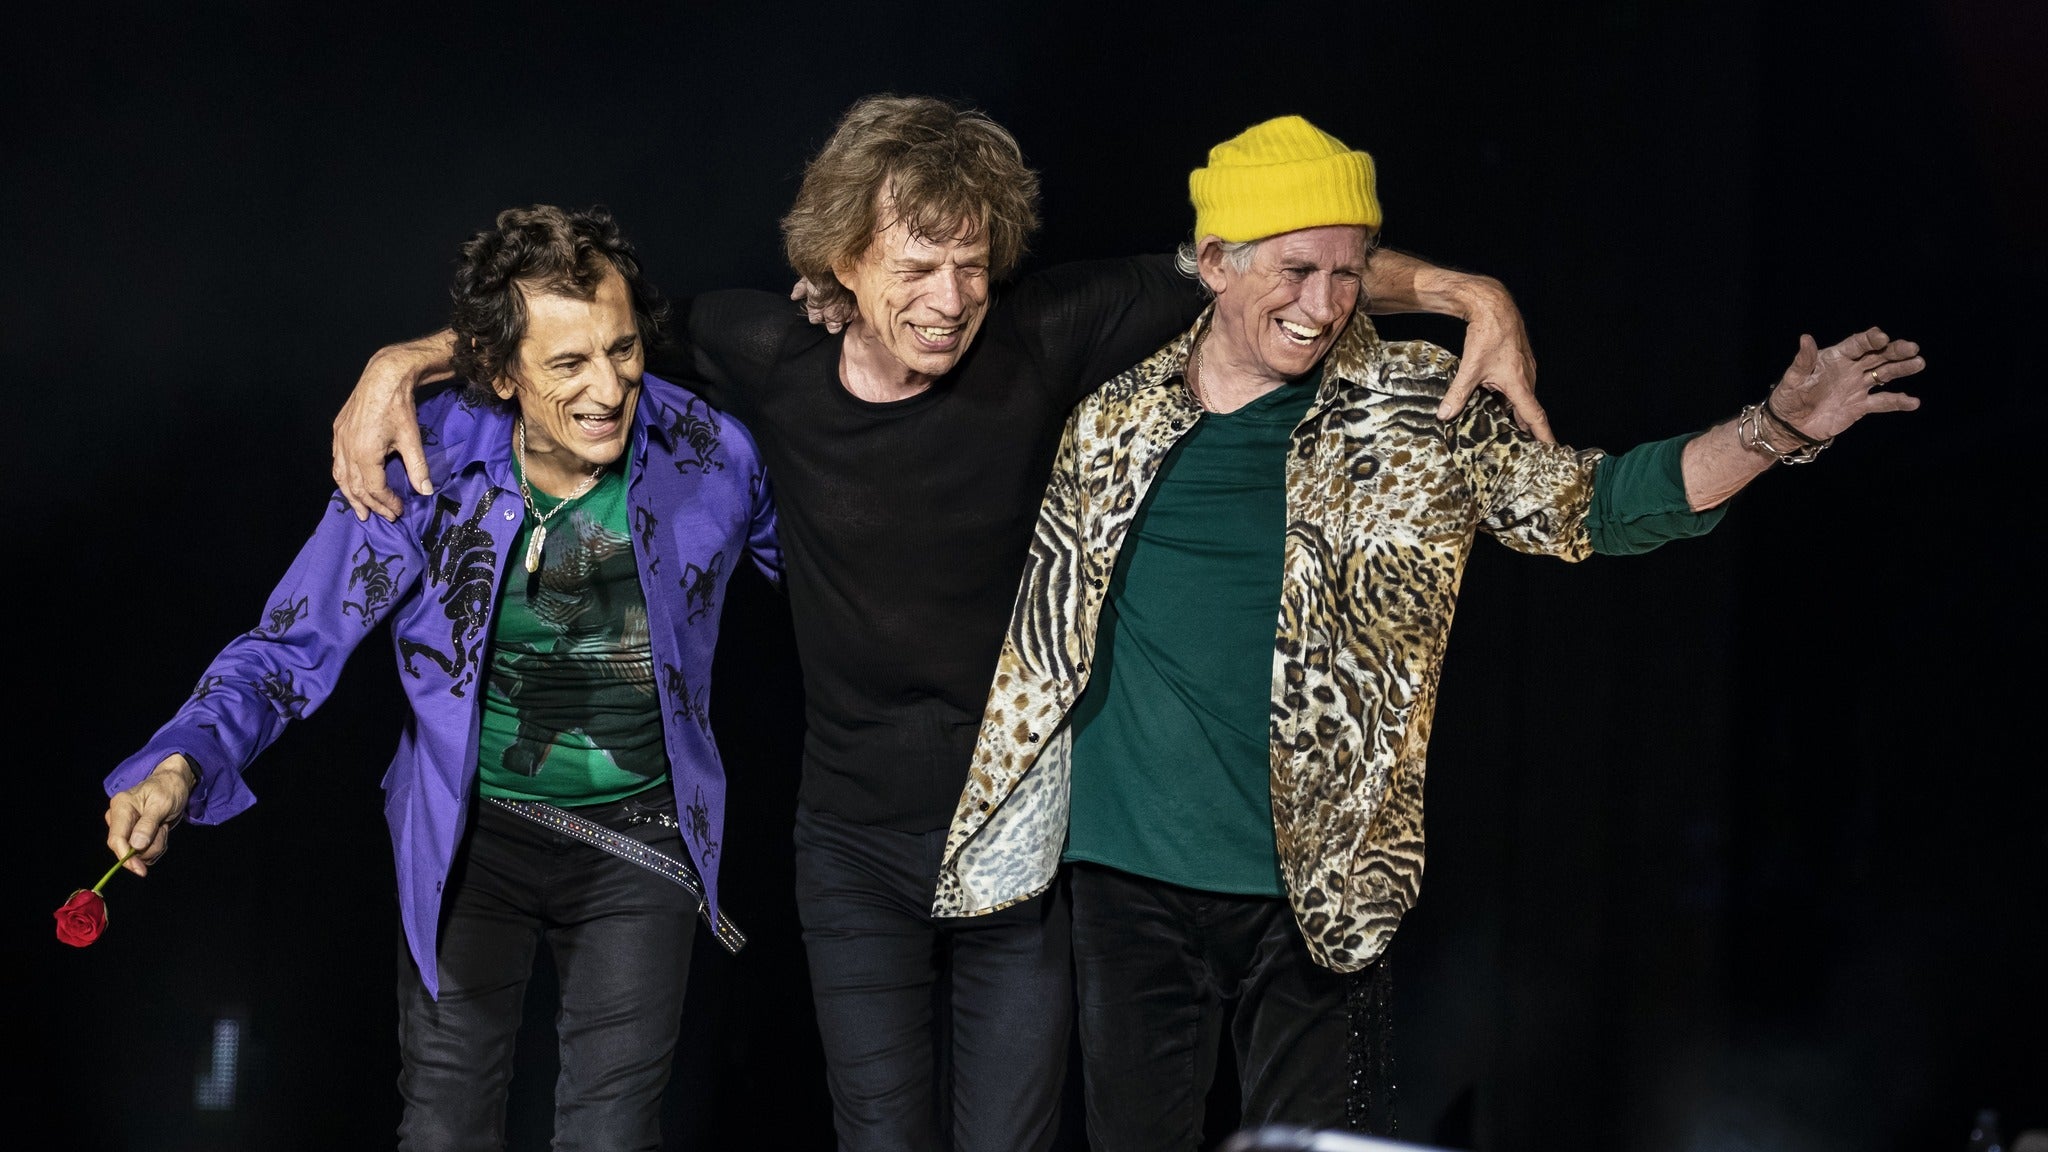 EXILE ON KING ST – THE ROLLING STONES 50th ANNIVERSARY SHOW